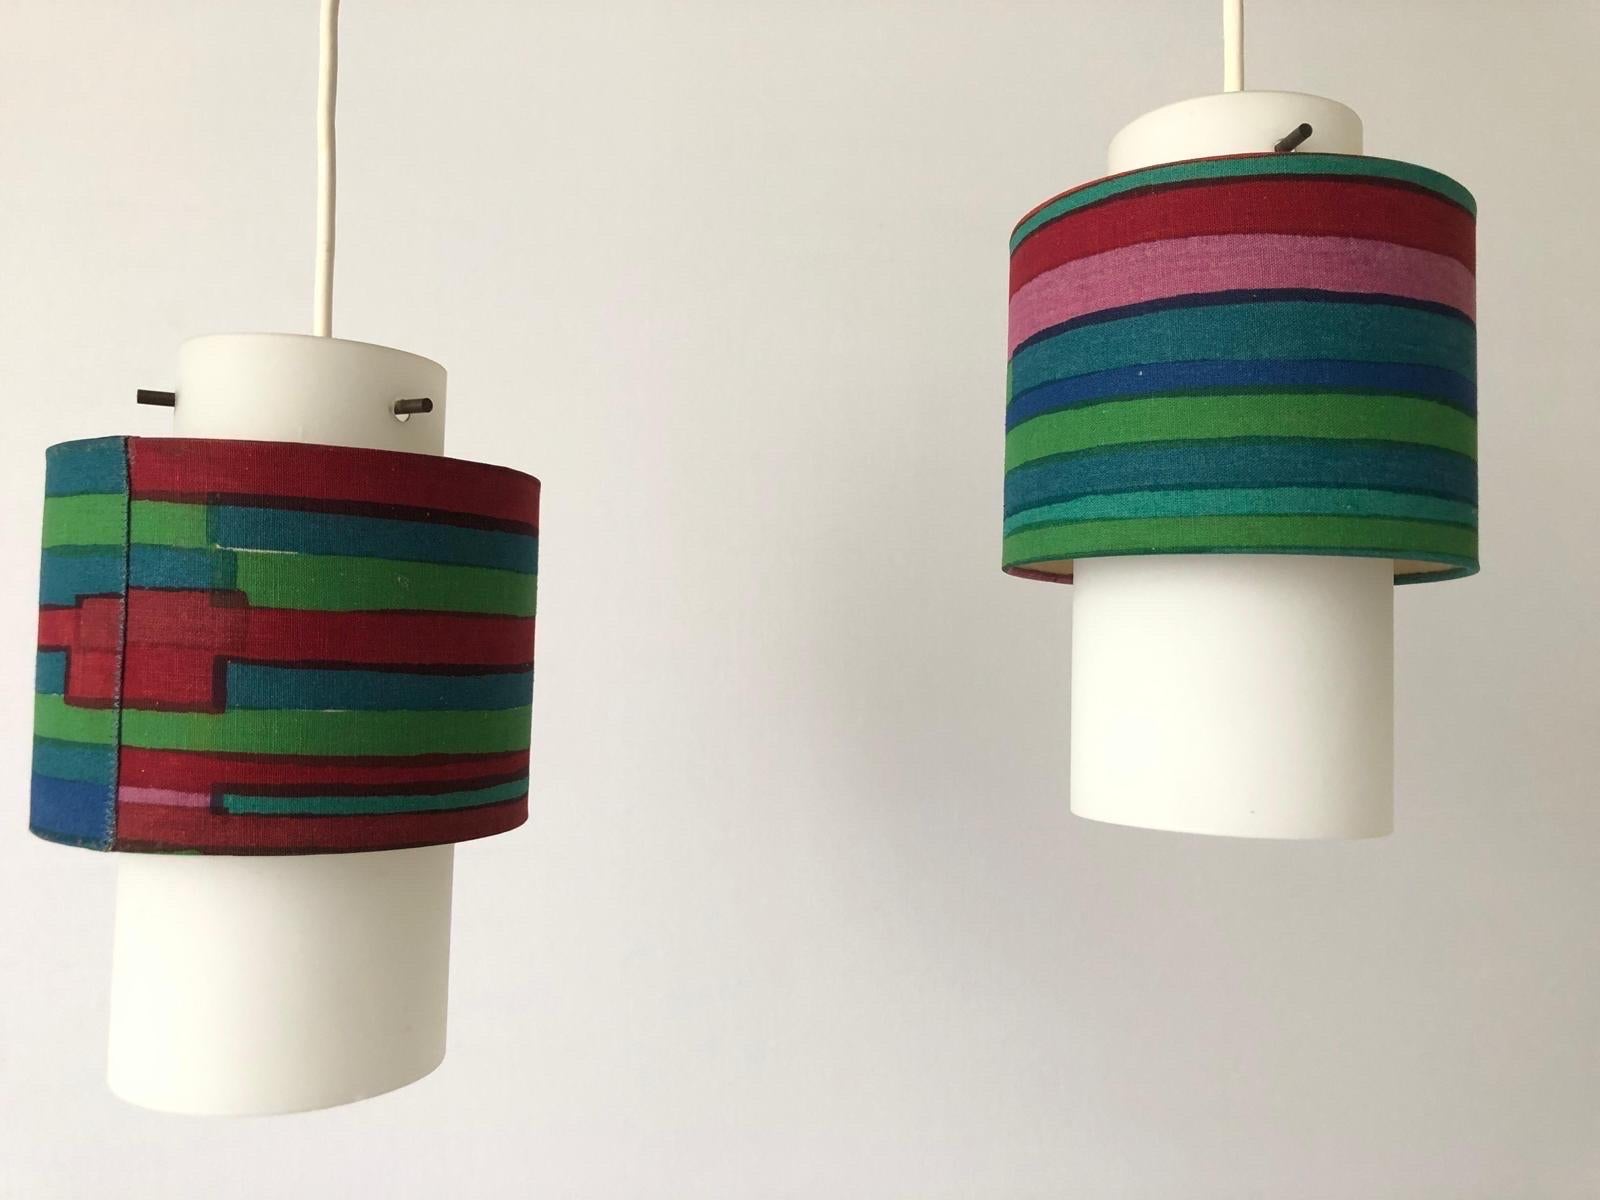 Retro Fabric Shade & Glass Triple Pendant Lamp, 1960s, Germany For Sale 1